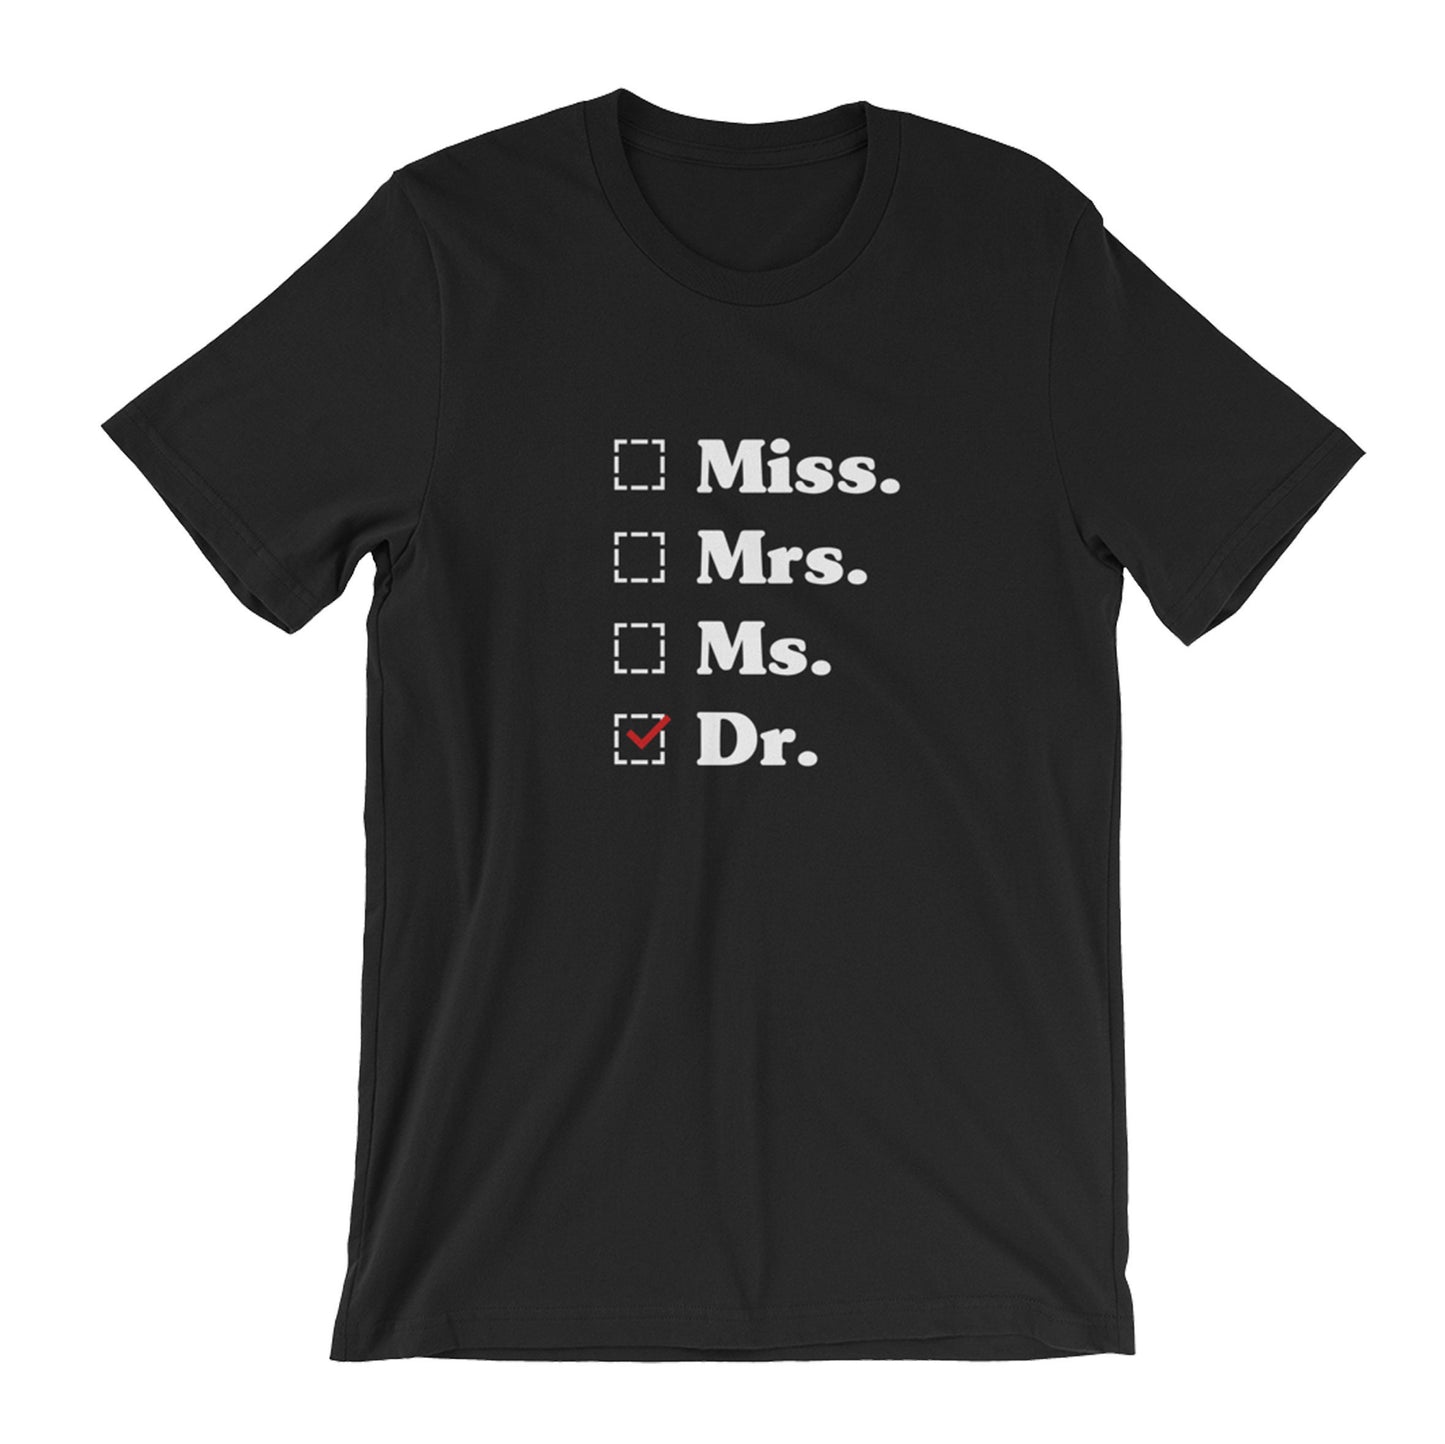 Miss. Mrs. Ms. Dr. Unisex Shirt - phd graduation gift - Doctor Gift For Her - Funny Doctor T-Shirt -  Unique Doctor Shirt